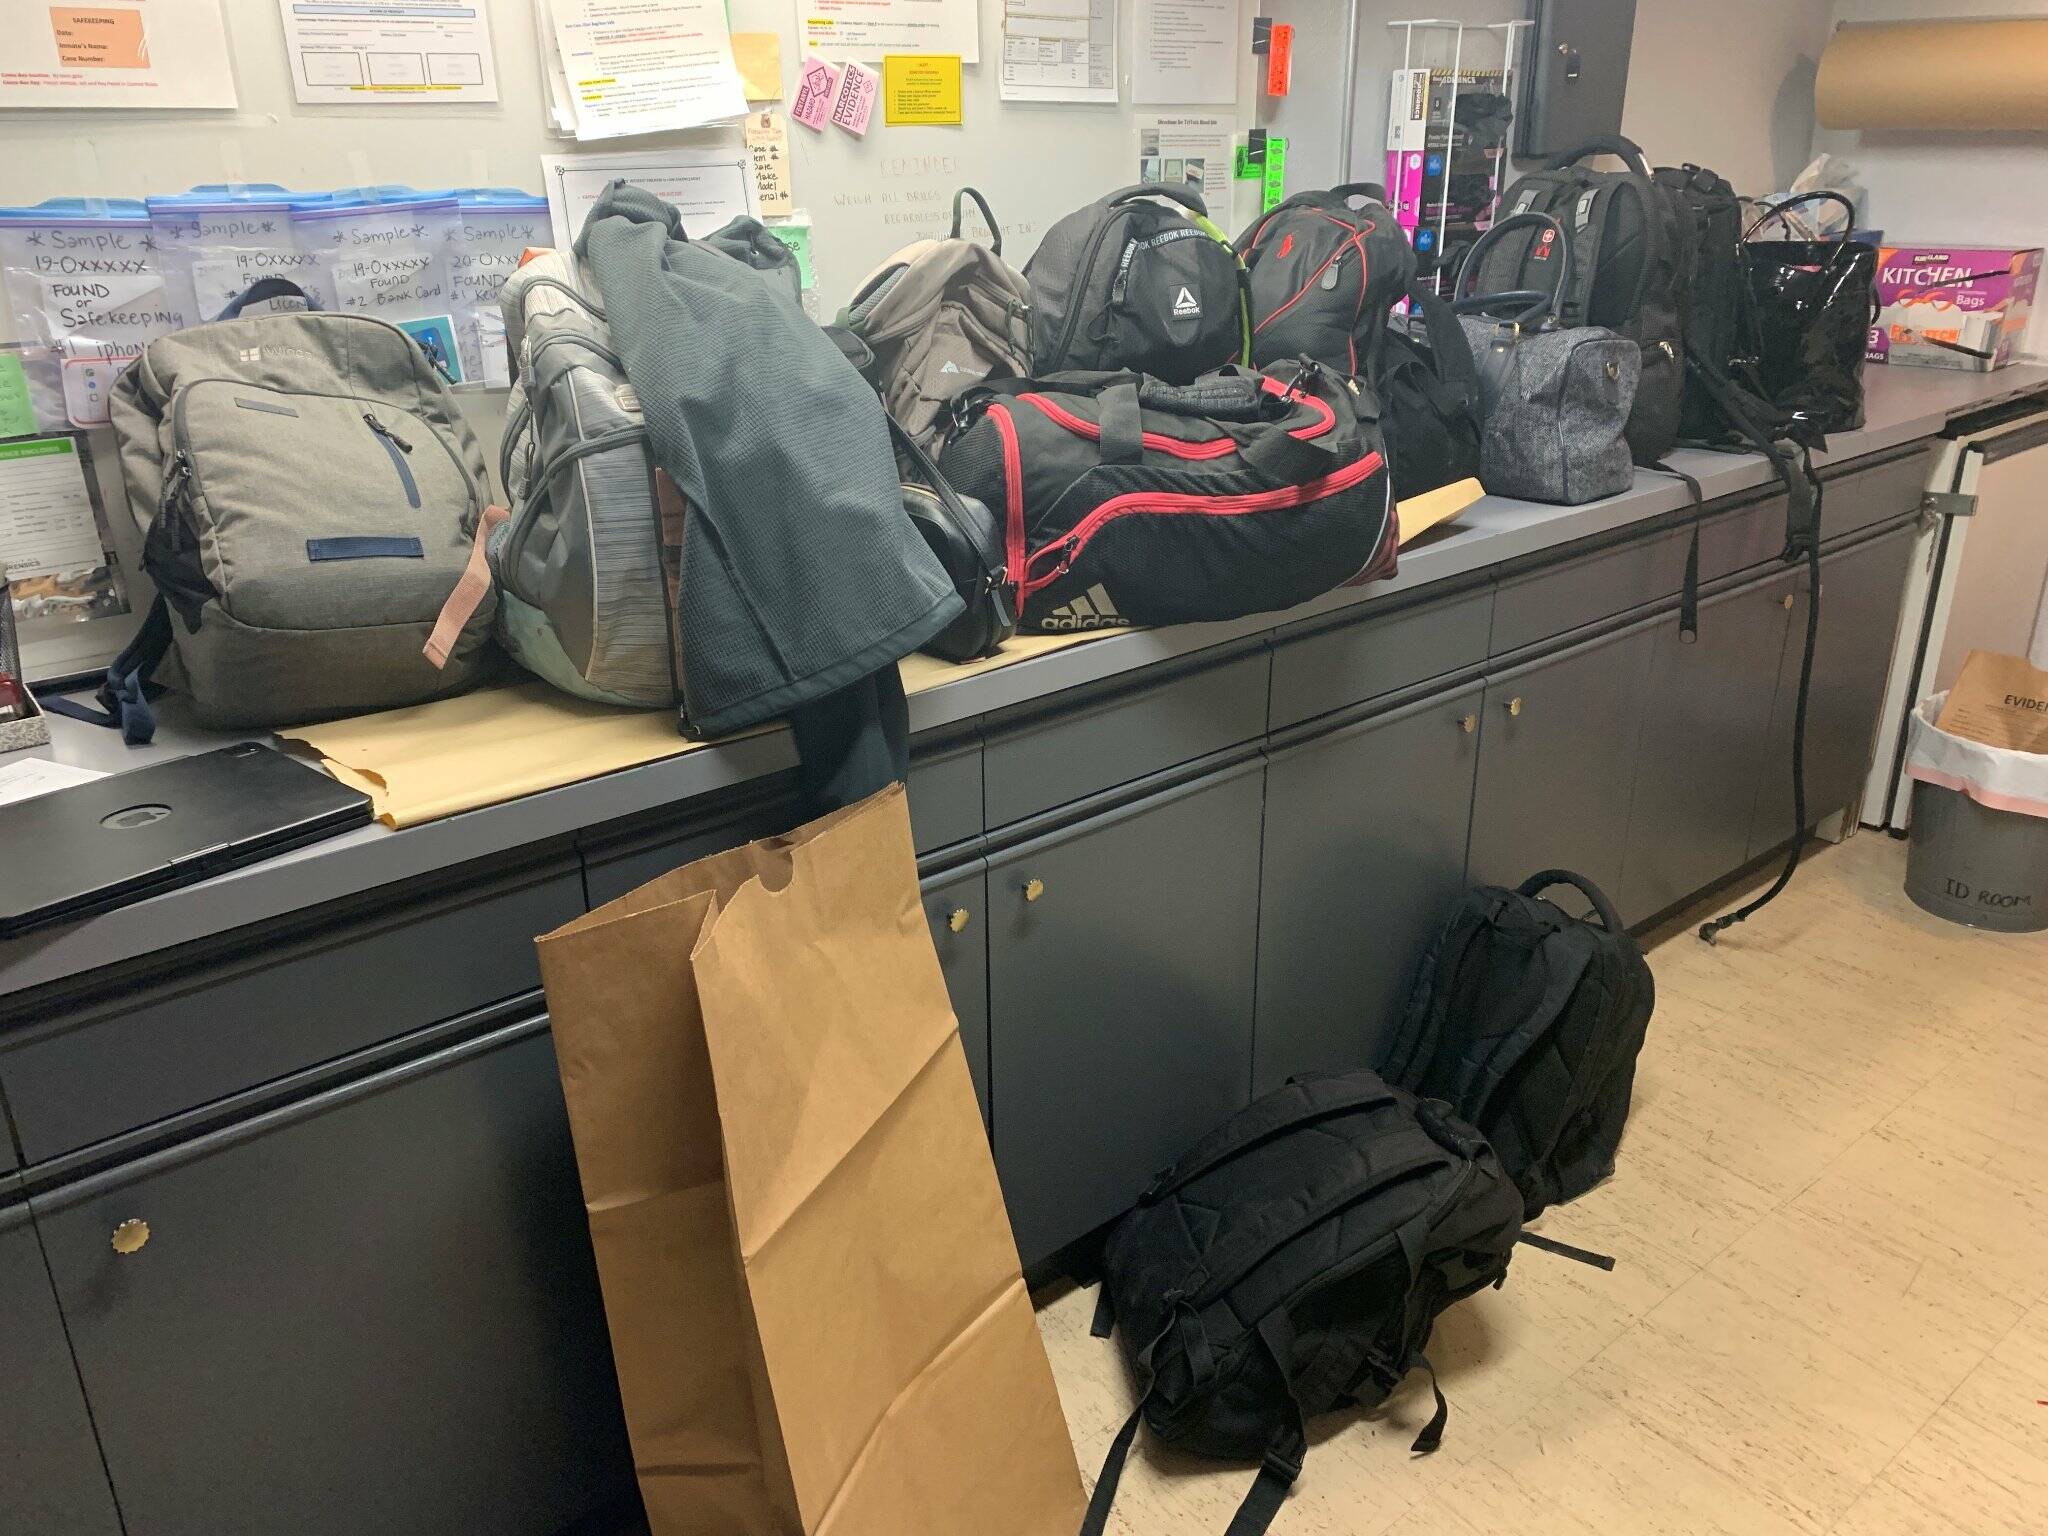 Oak Harbor police photo
Officers recovered more than a dozens bags from suspected thieves.